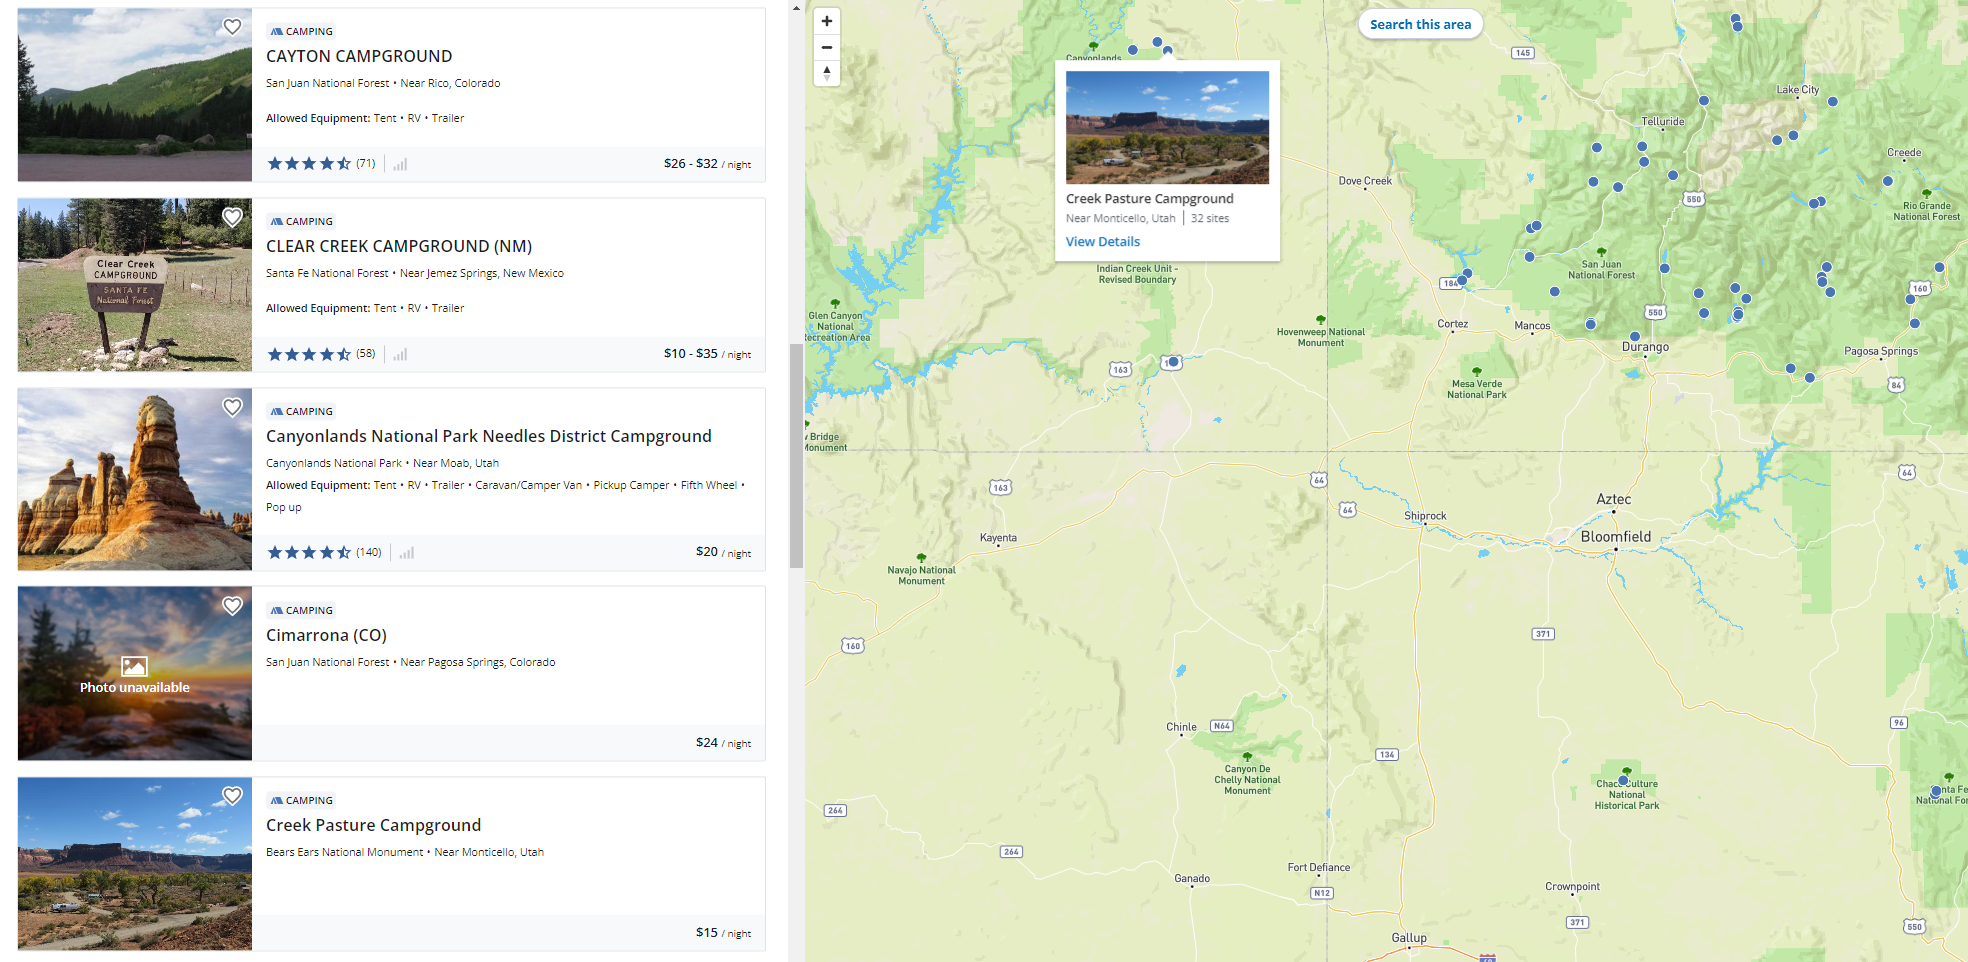 Map from Recreation.gov with campsites in Colorado, Arizona, Utah, and New Mexico